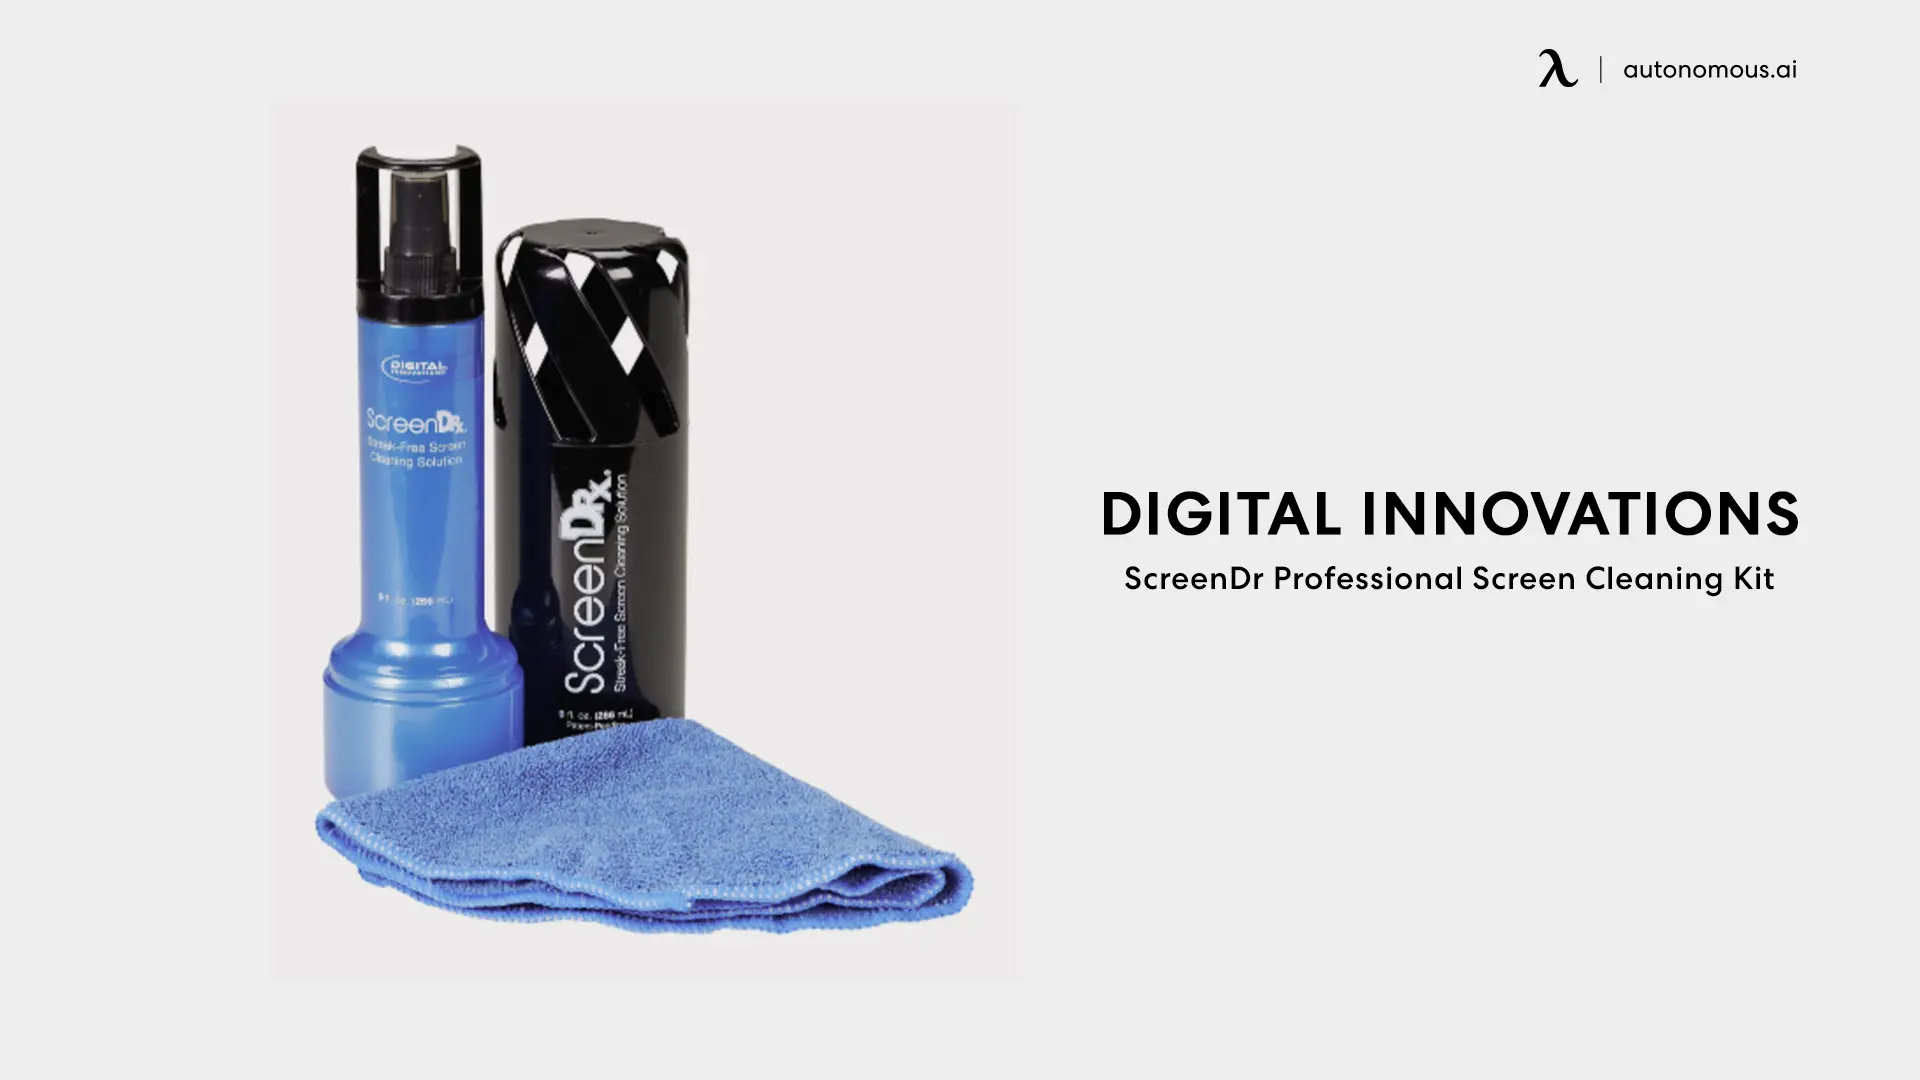 ScreenDr Professional Screen Cleaning Kit from Digital Innovations